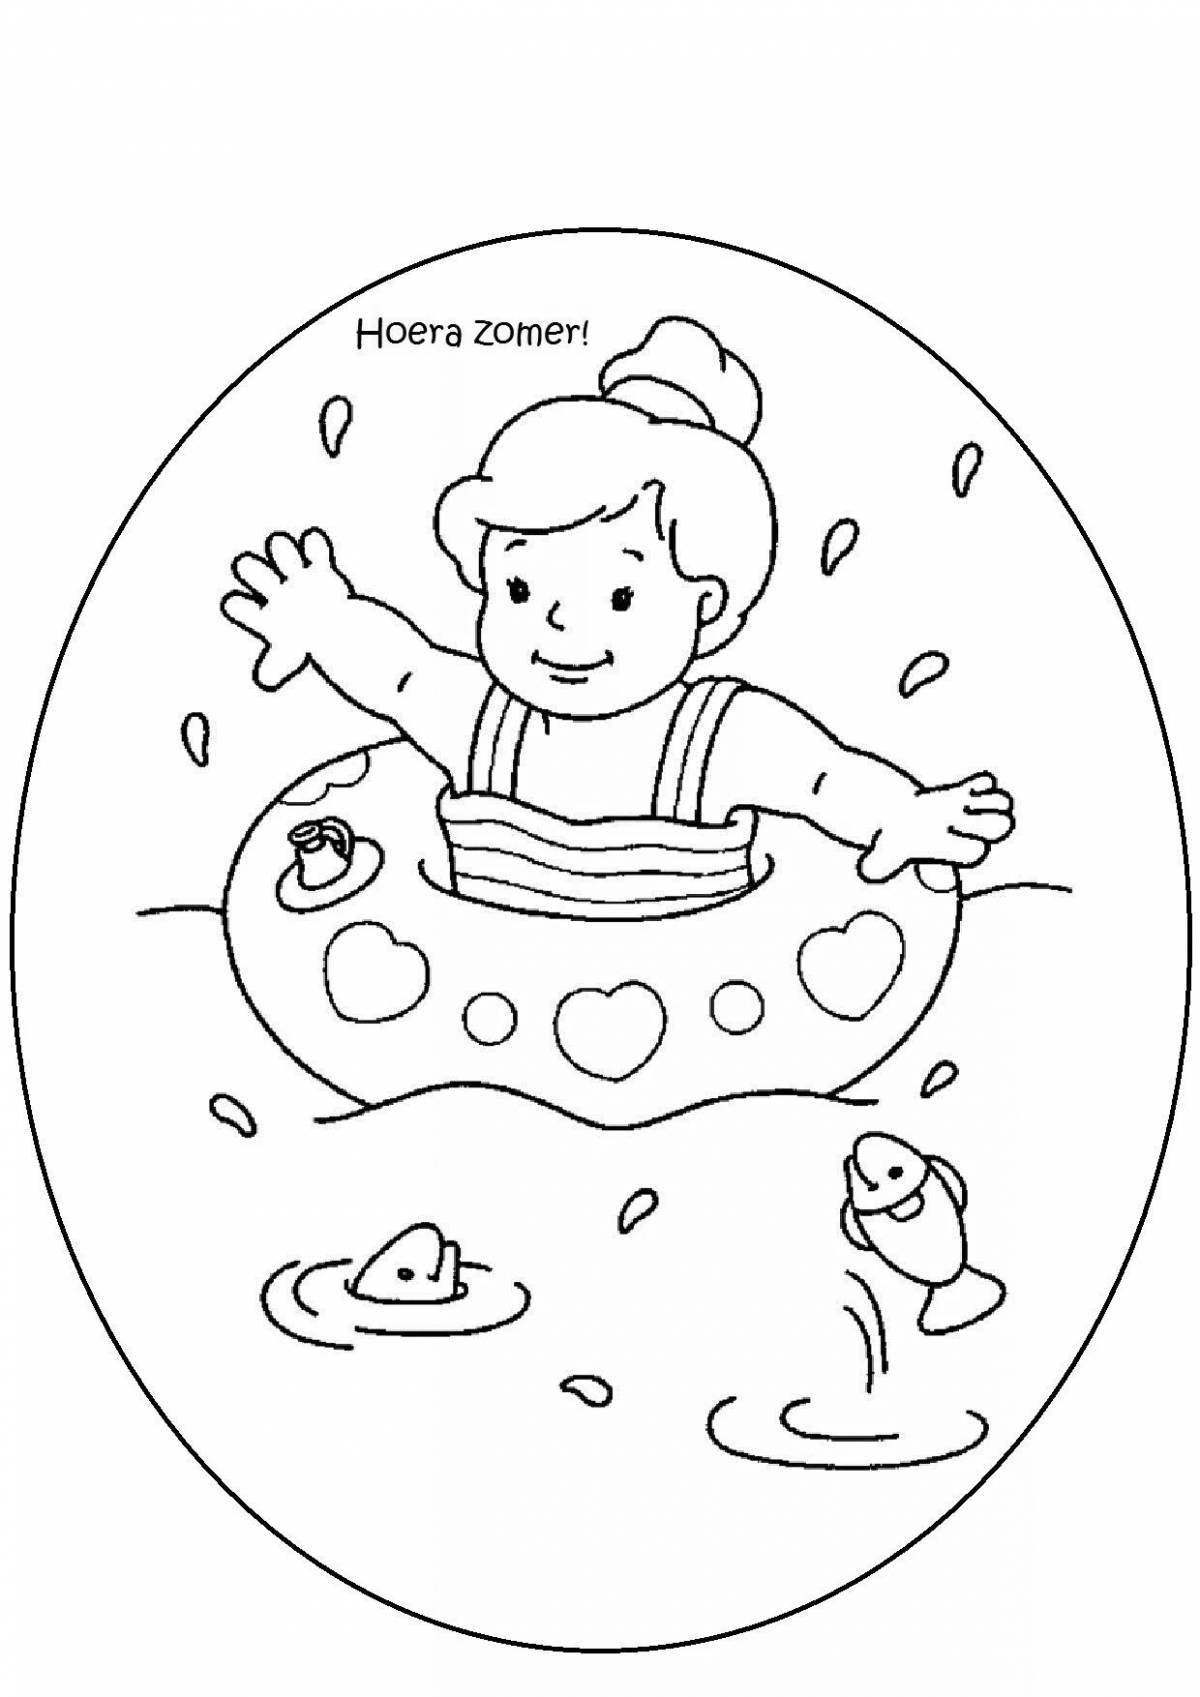 Cute water safety coloring page